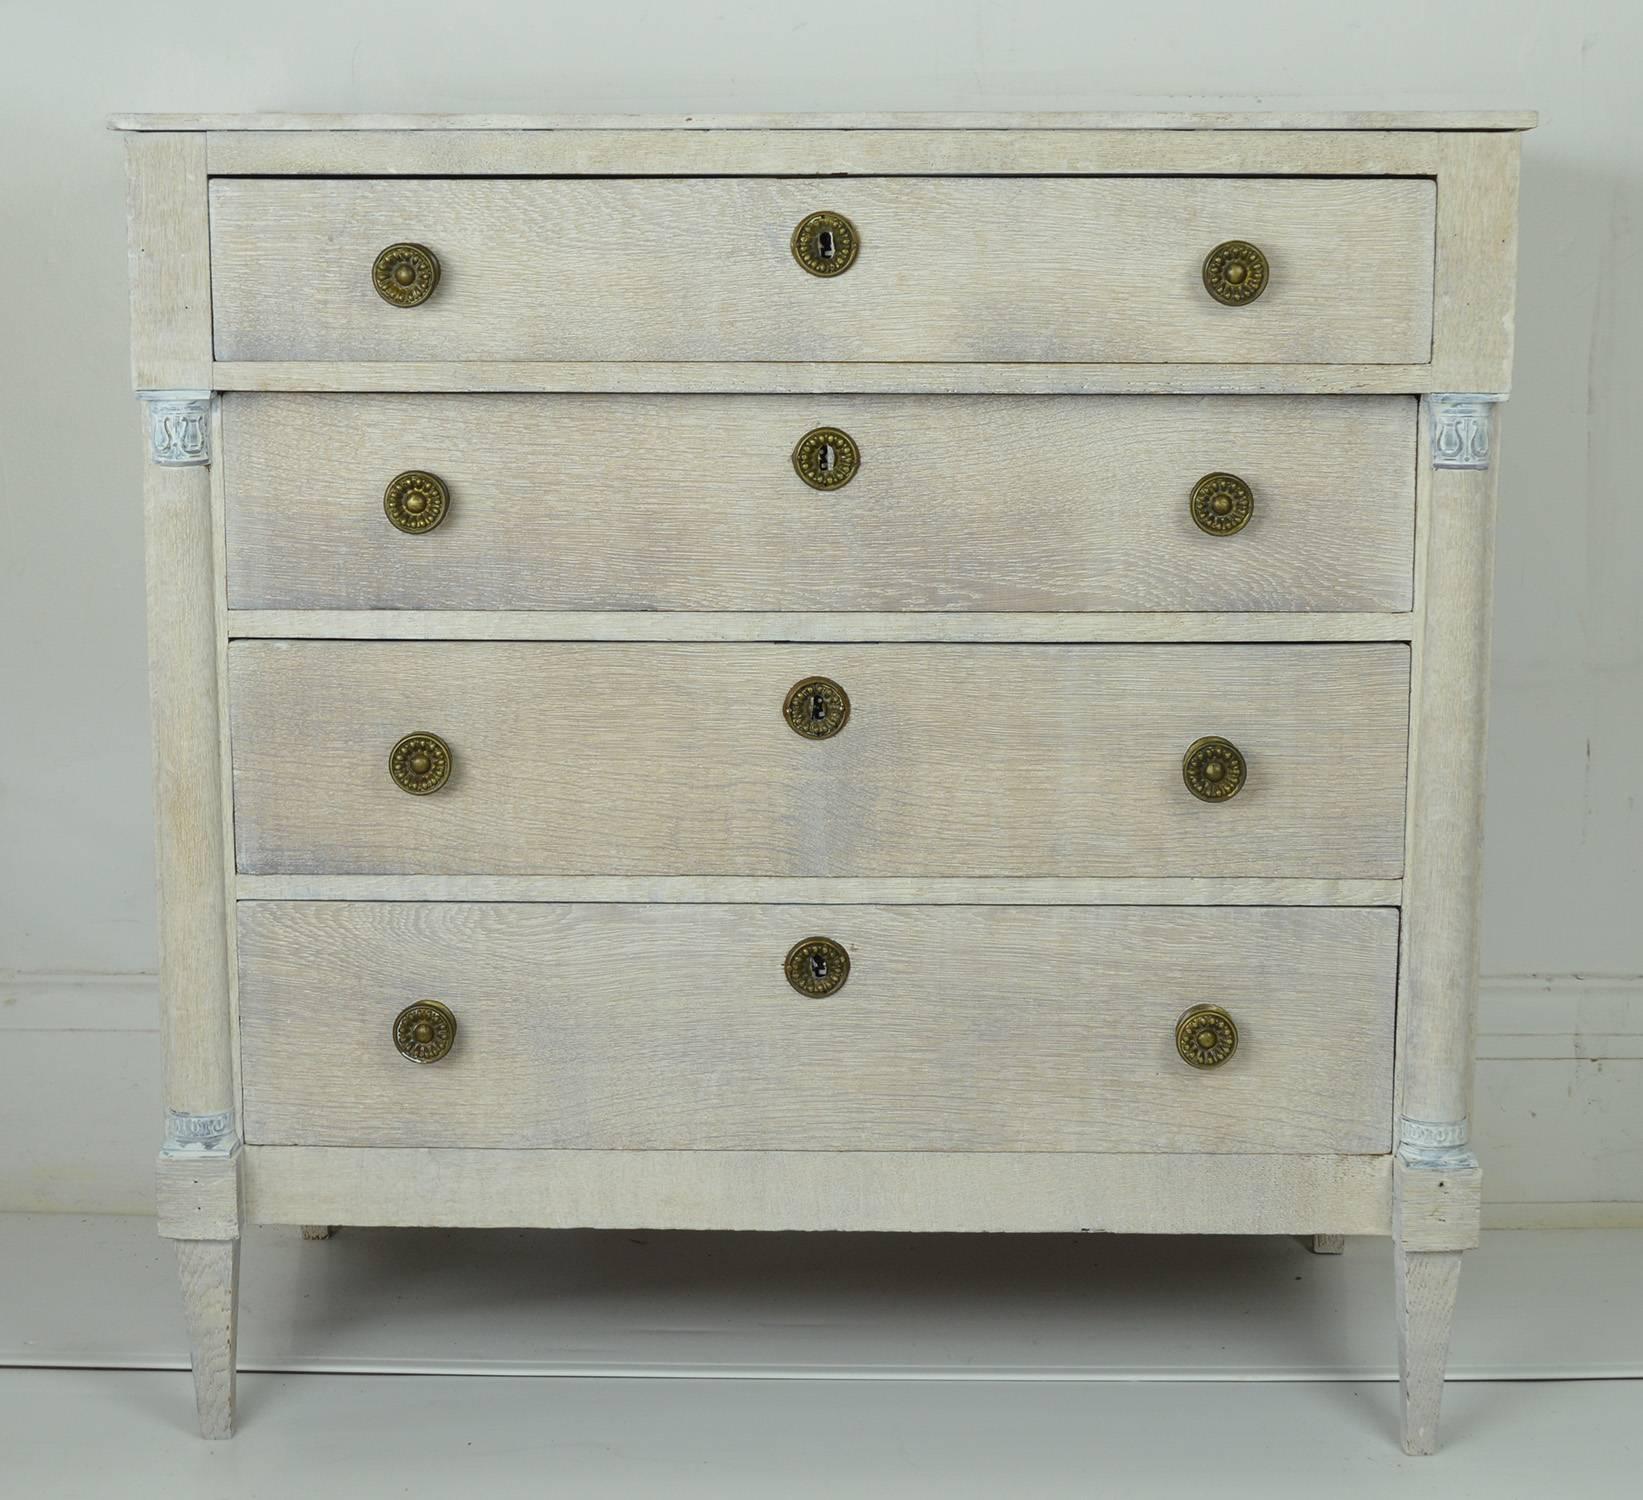 Charming limed oak commode or chest of drawers.

Provincial French in Directoire taste, early 19th century.

Wonderful simple lines. Half round column detail on the sides of the front.

Original gilt brass hardware.

Original almost